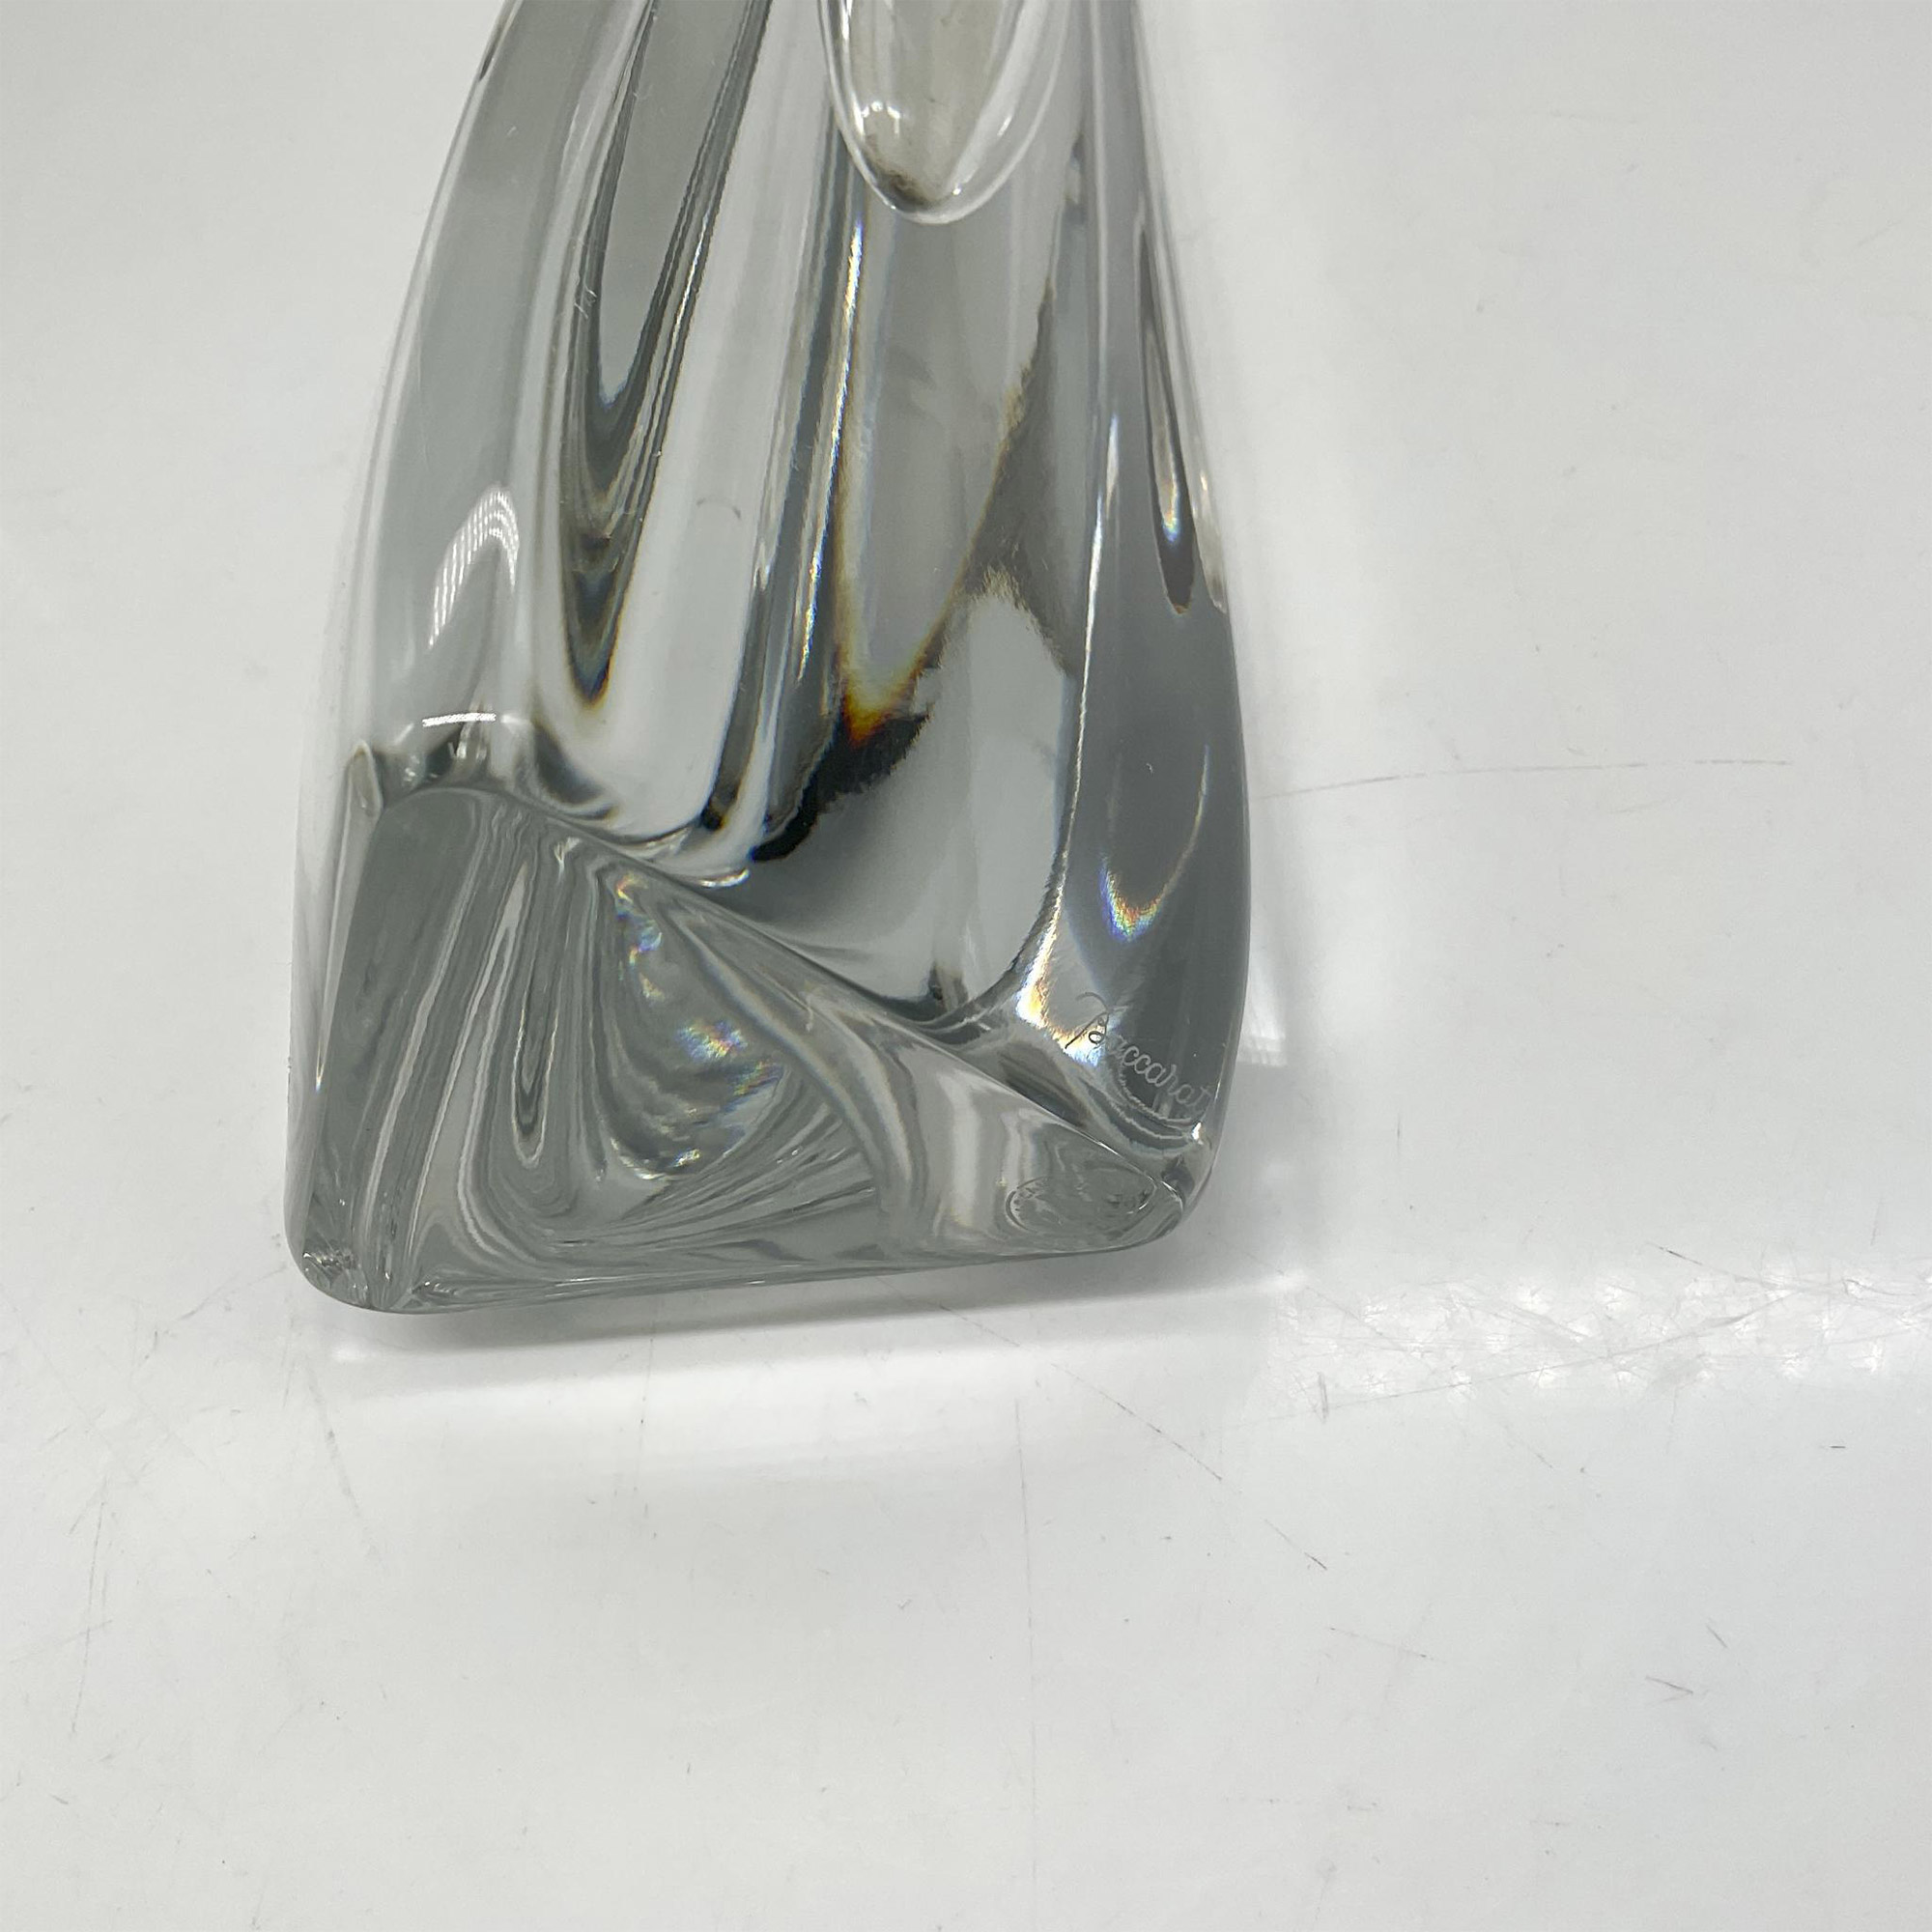 Baccarat Crystal Vase, Triangle Cut - Image 3 of 3